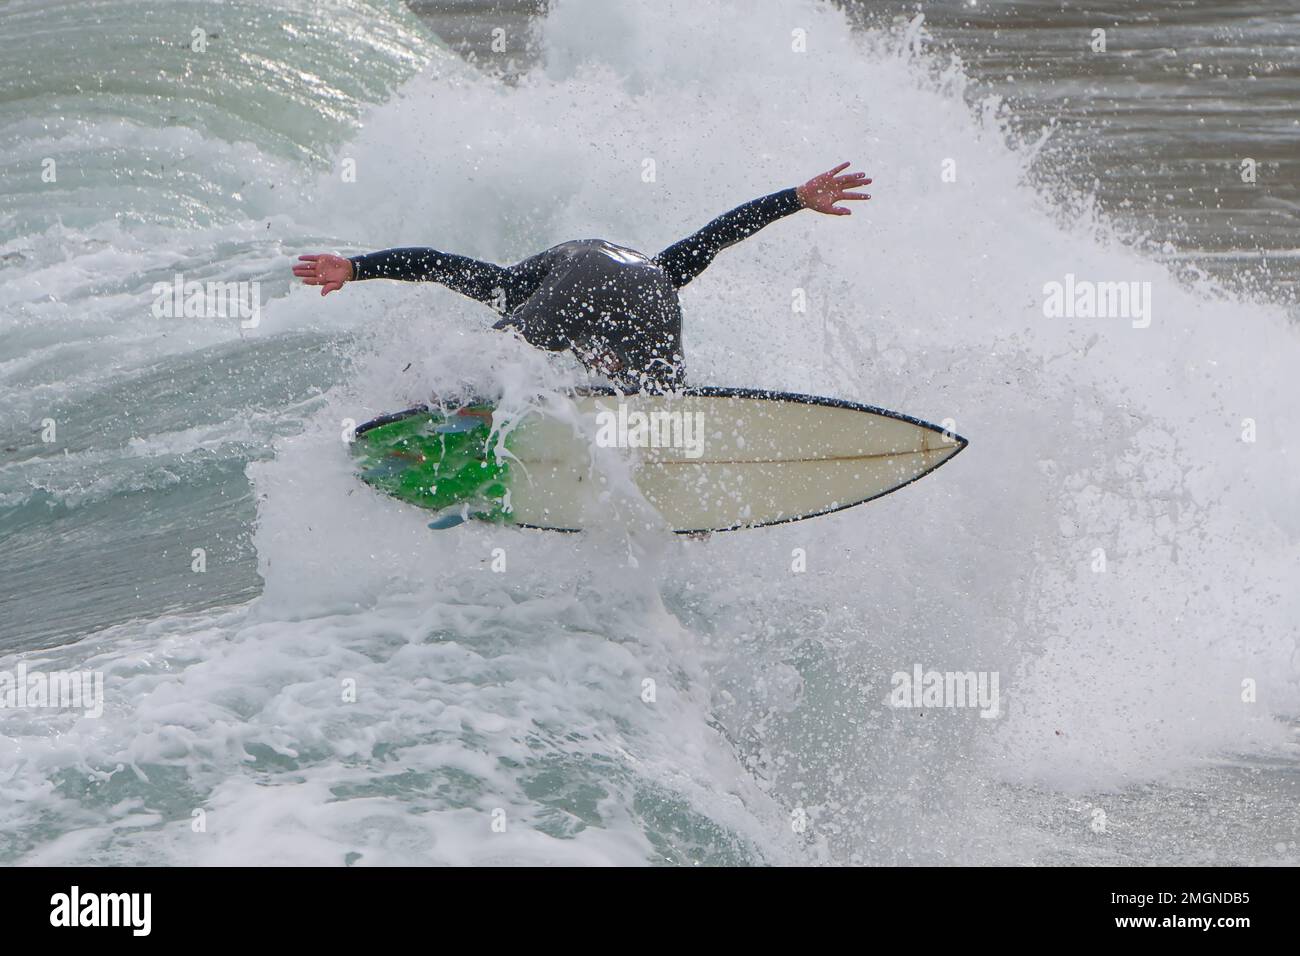 Surfer falling off board as waves crash in a wipeout Stock Photo